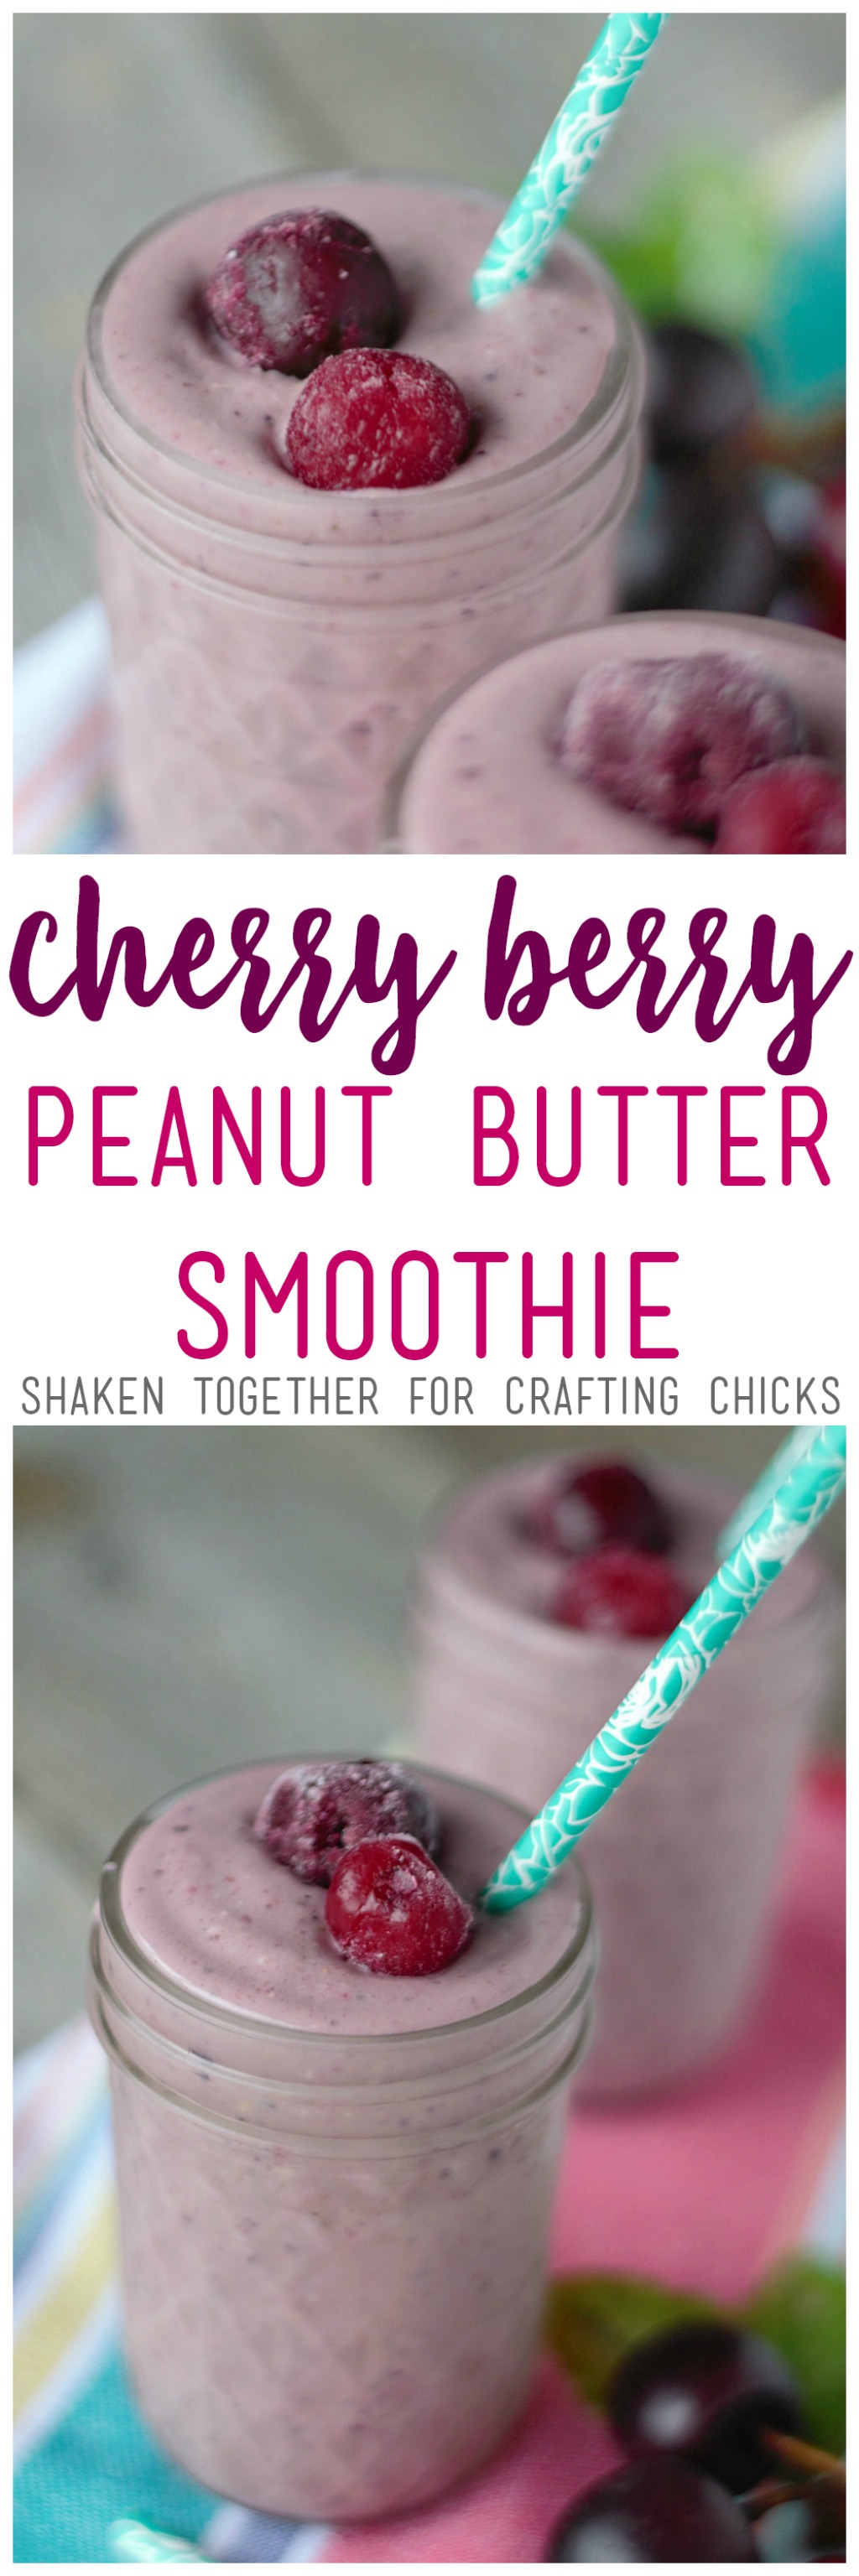 Packed with fruit, peanut butter and oats, this Cherry Berry Peanut Butter Smoothie is healthy and delicious!